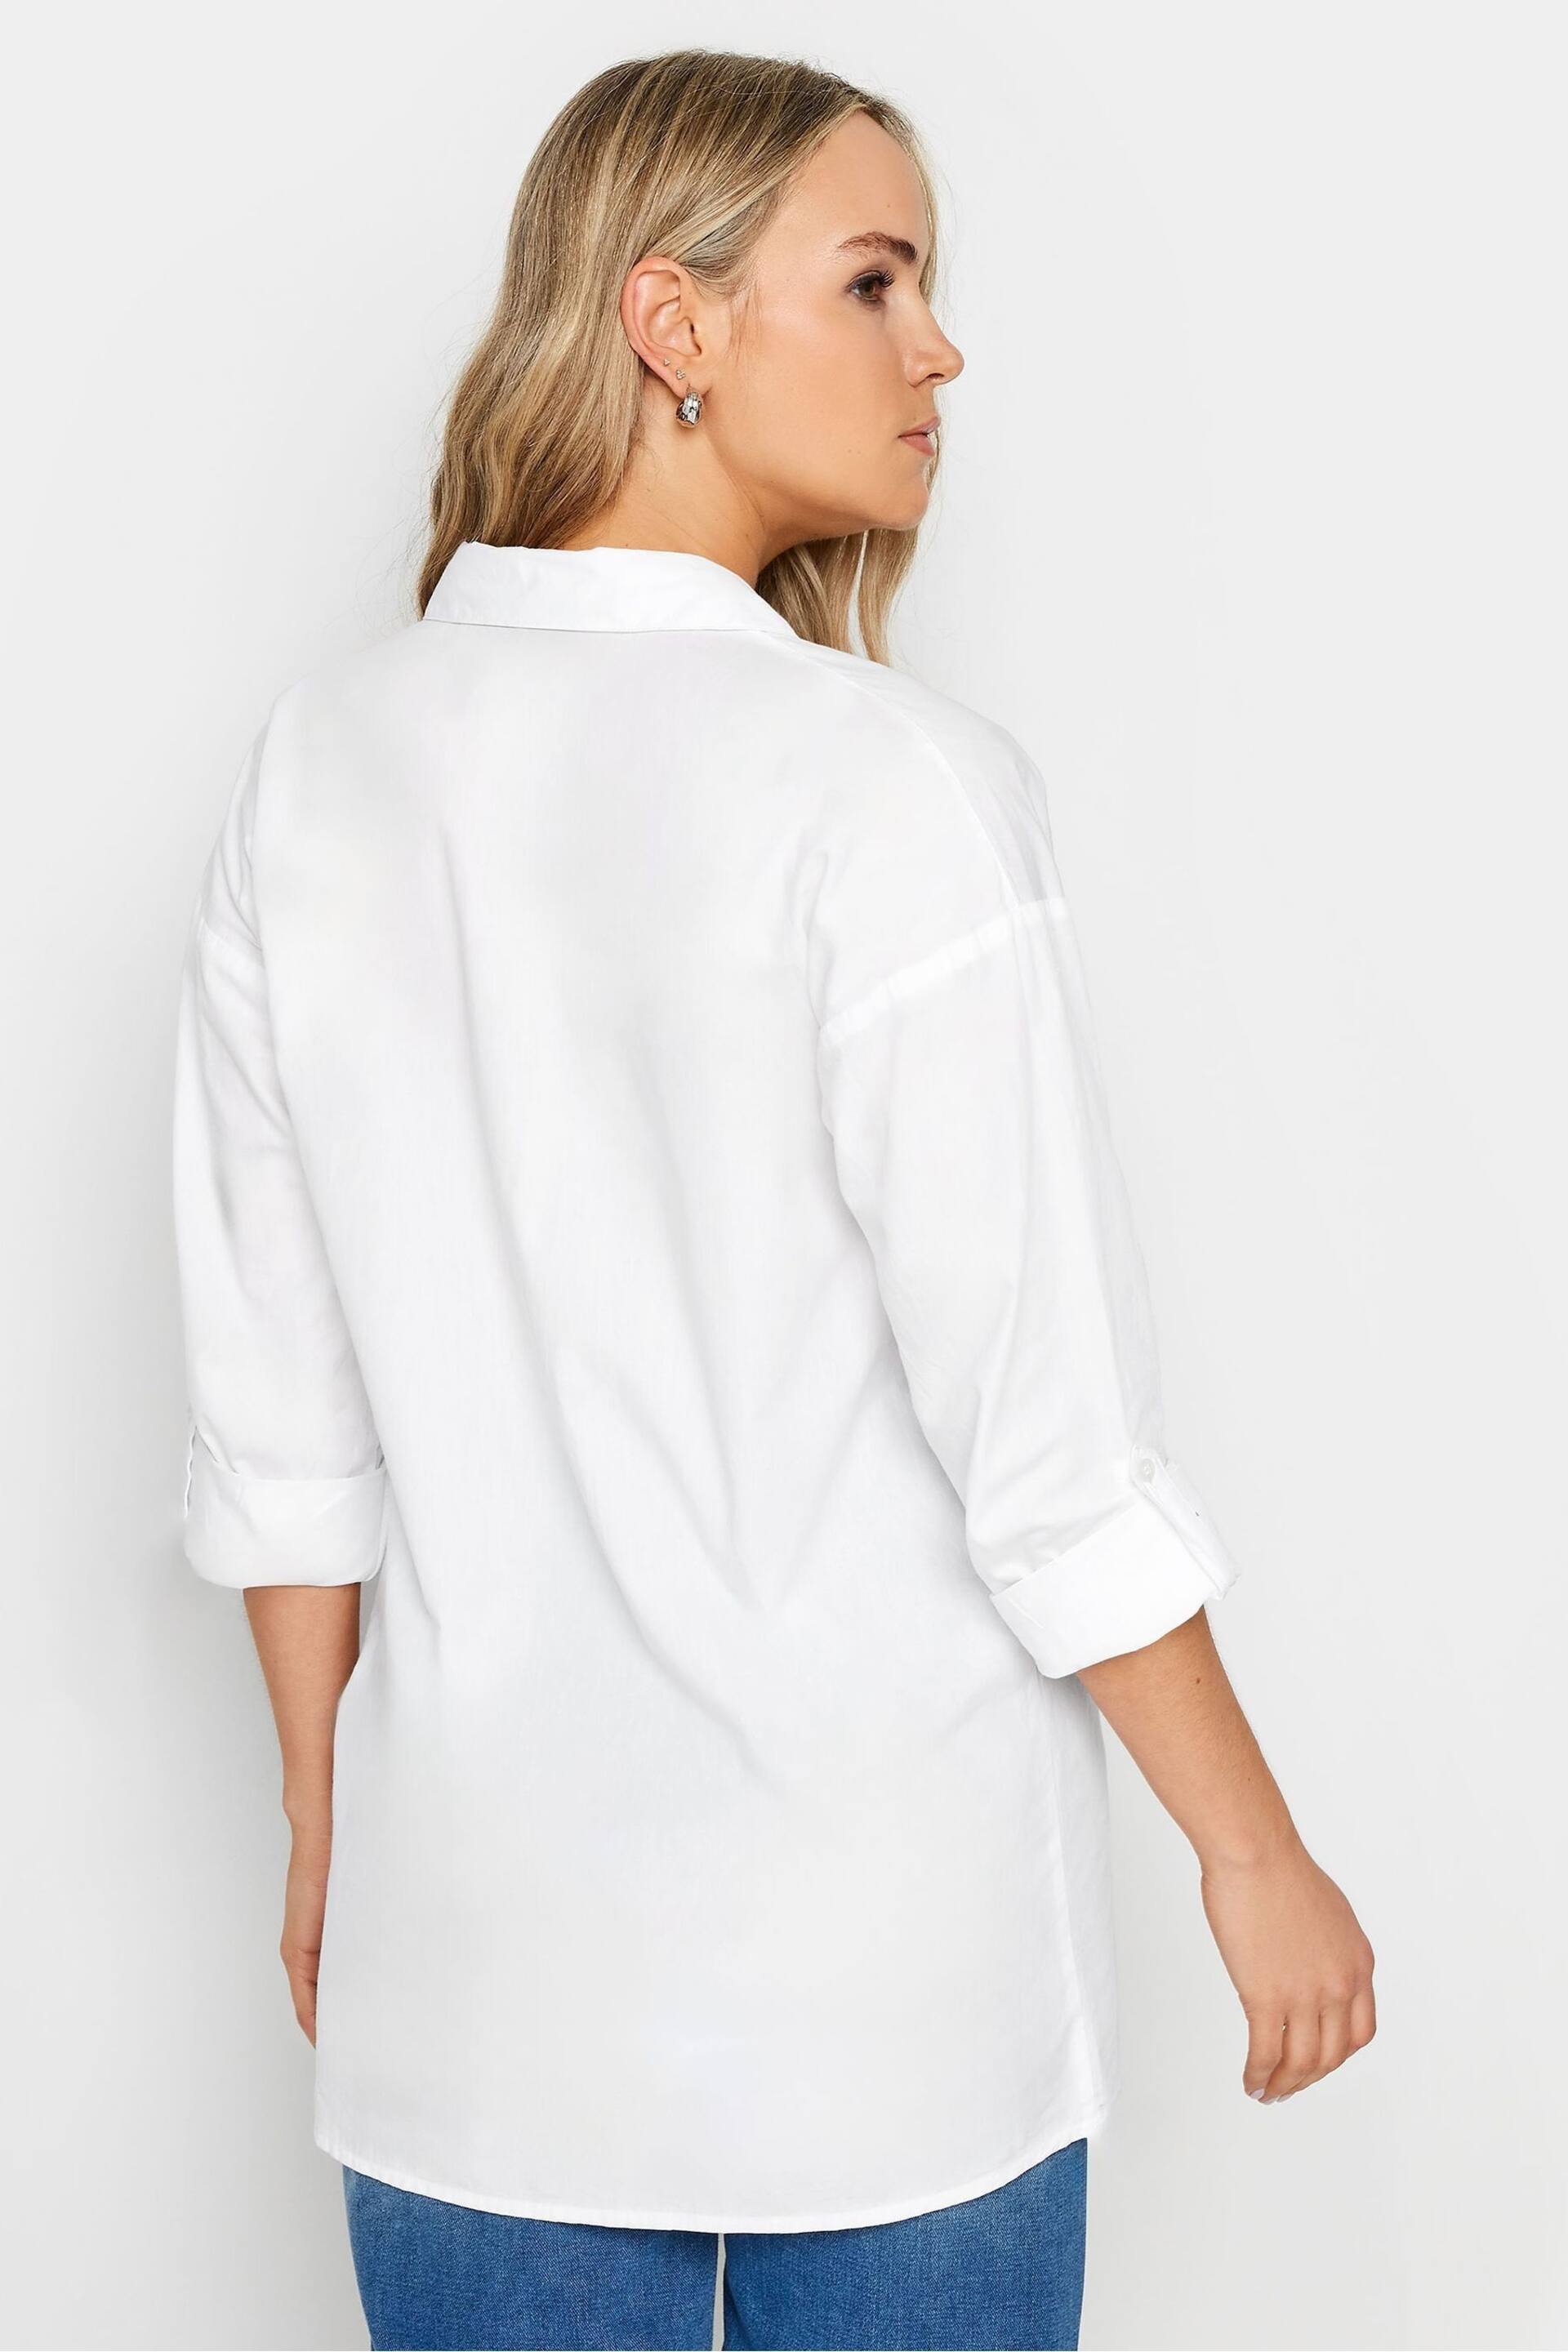 Long Tall Sally White Cotton Oversized Shirt - Image 3 of 4